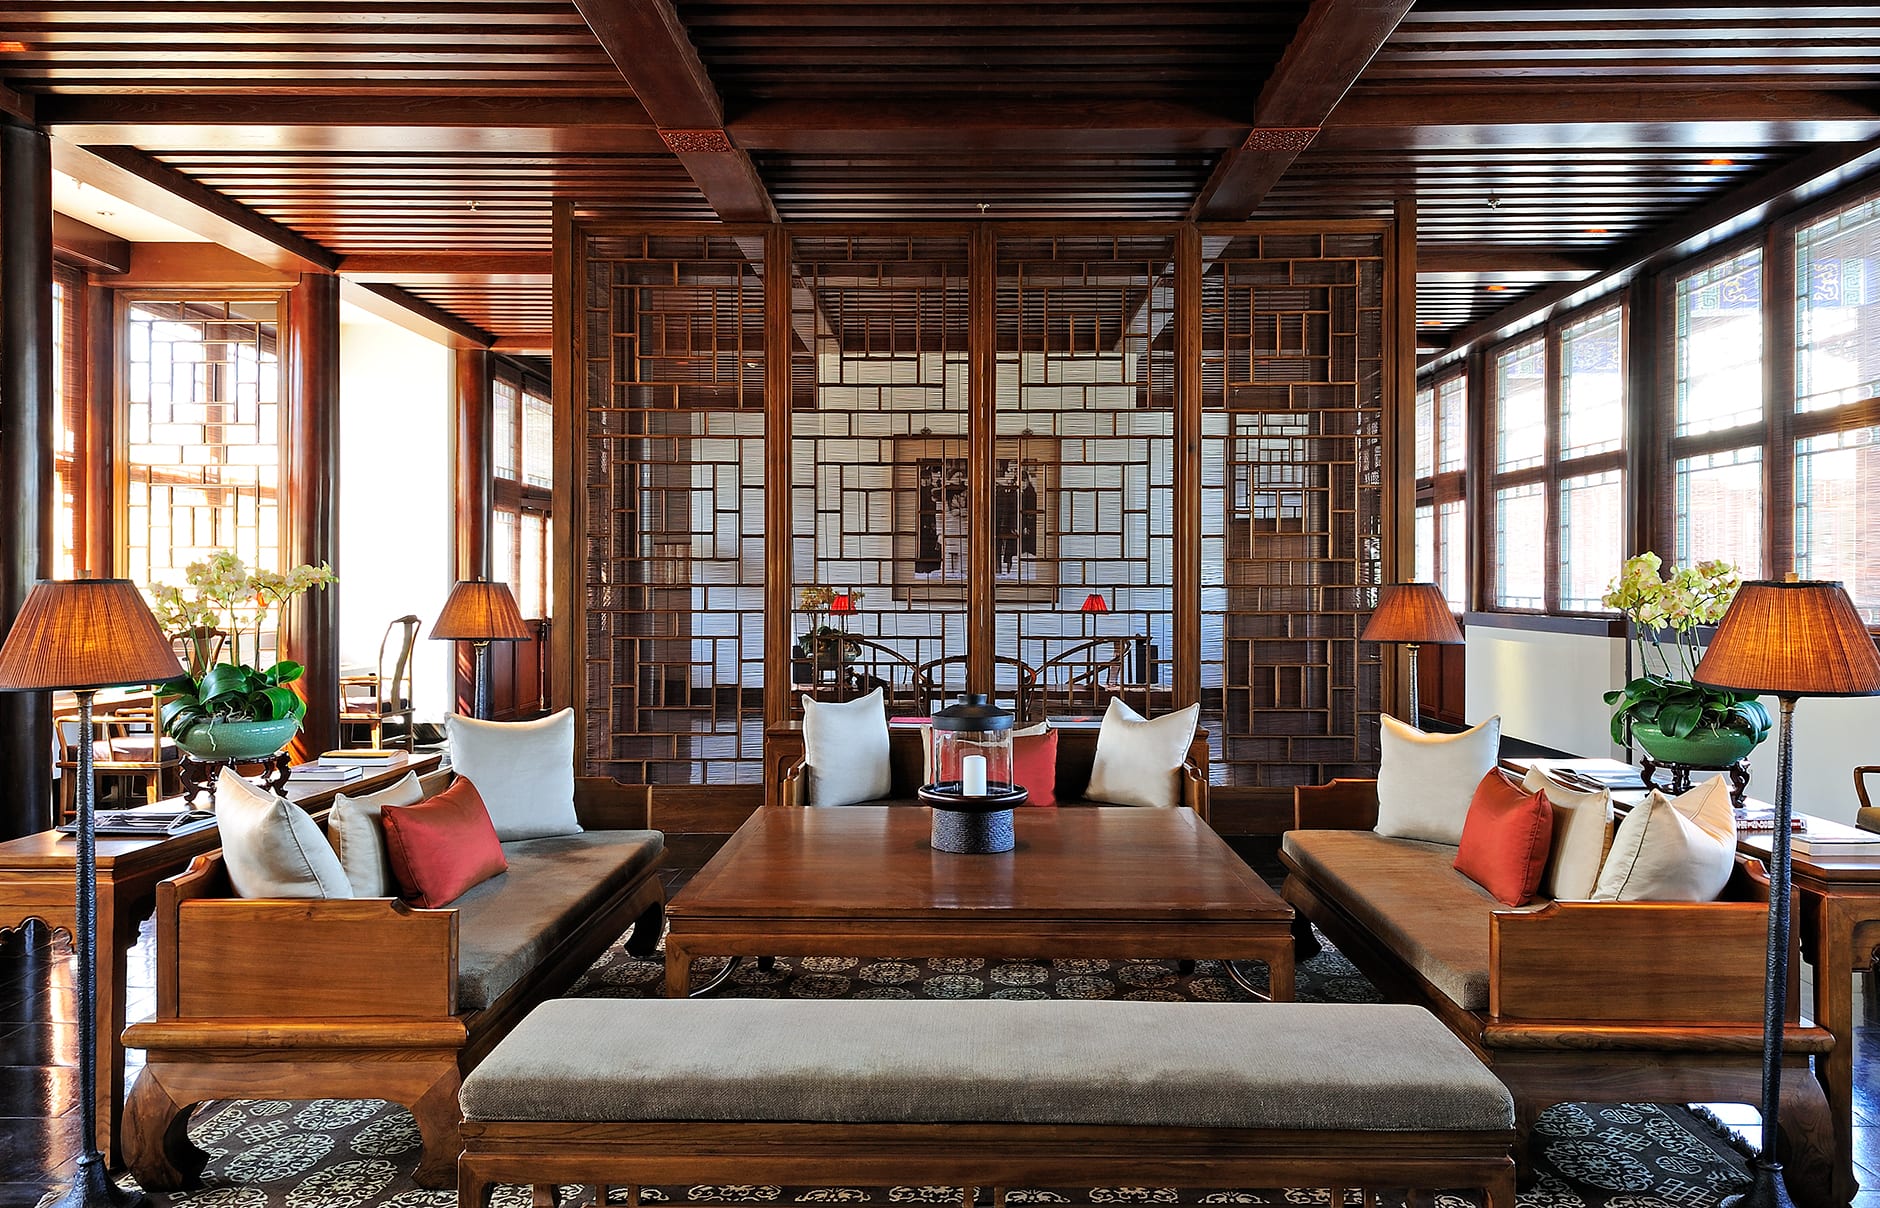 Aman at Summer Palace, Beijing, China. Luxury Hotel Review by TravelPlusStyle. Photo © Amanresorts